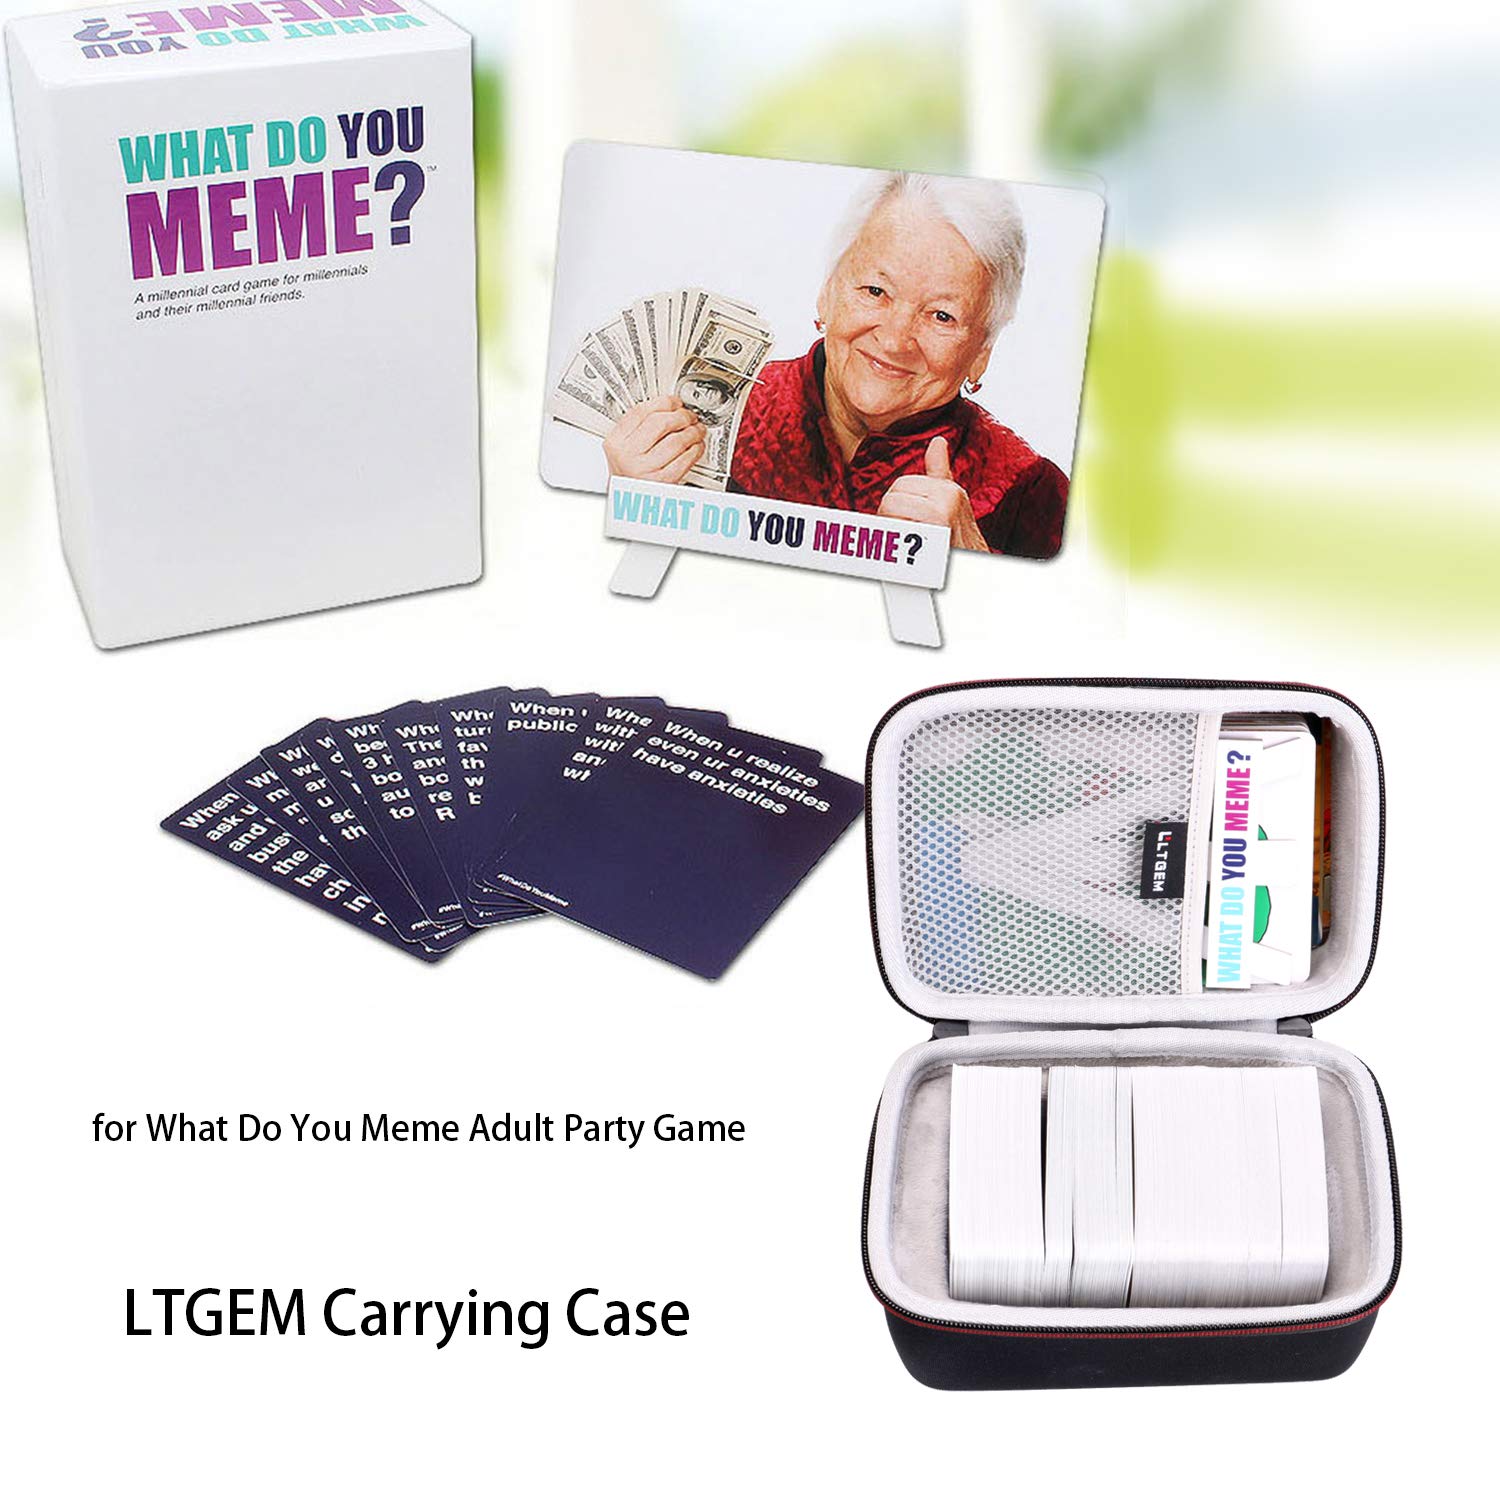 What Do You Meme Adult Party Game Topix